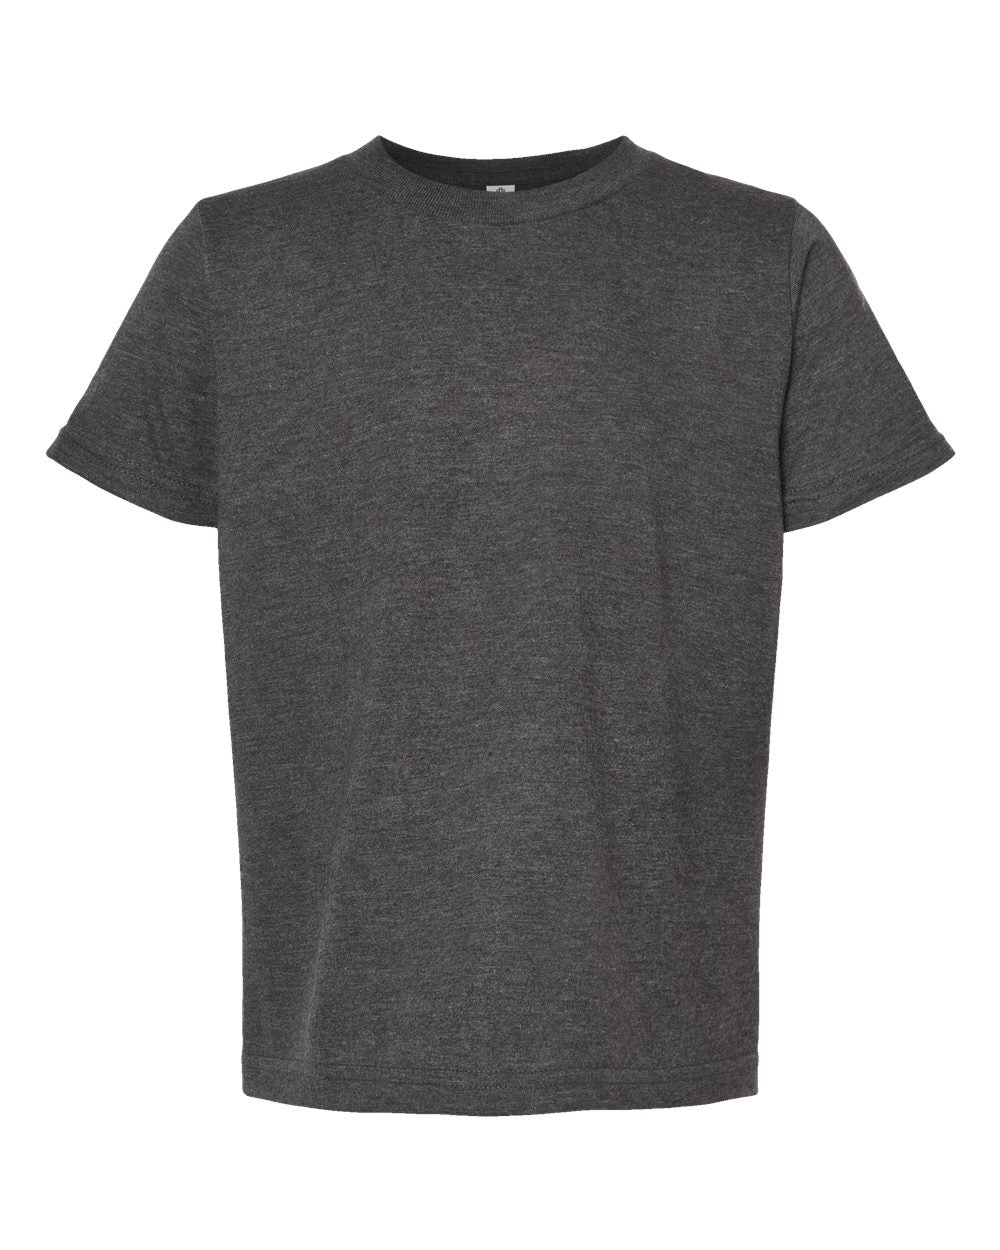 Tultex Youth Tee (235) in Heather Charcoal